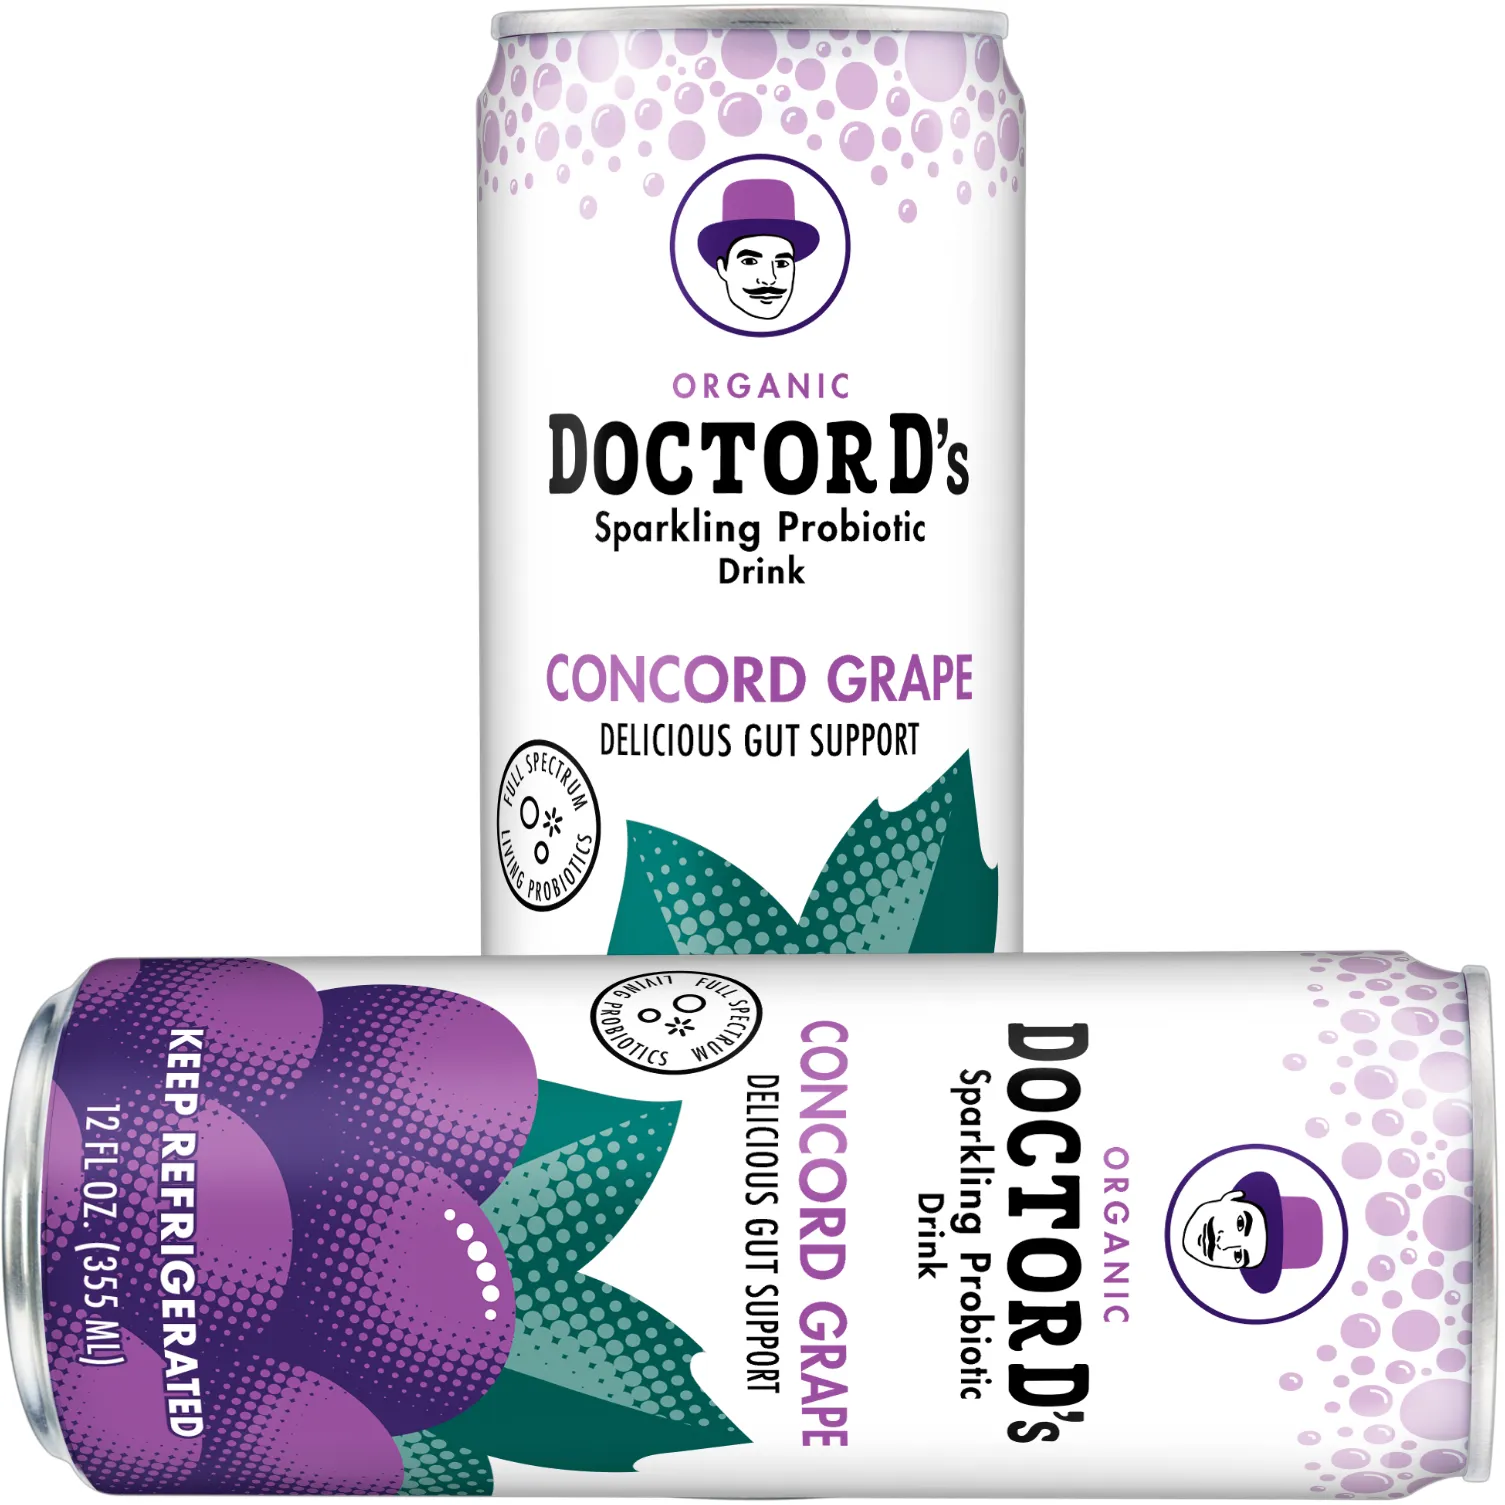 Free Can Of Doctor D's Sparkling Probiotic Drink